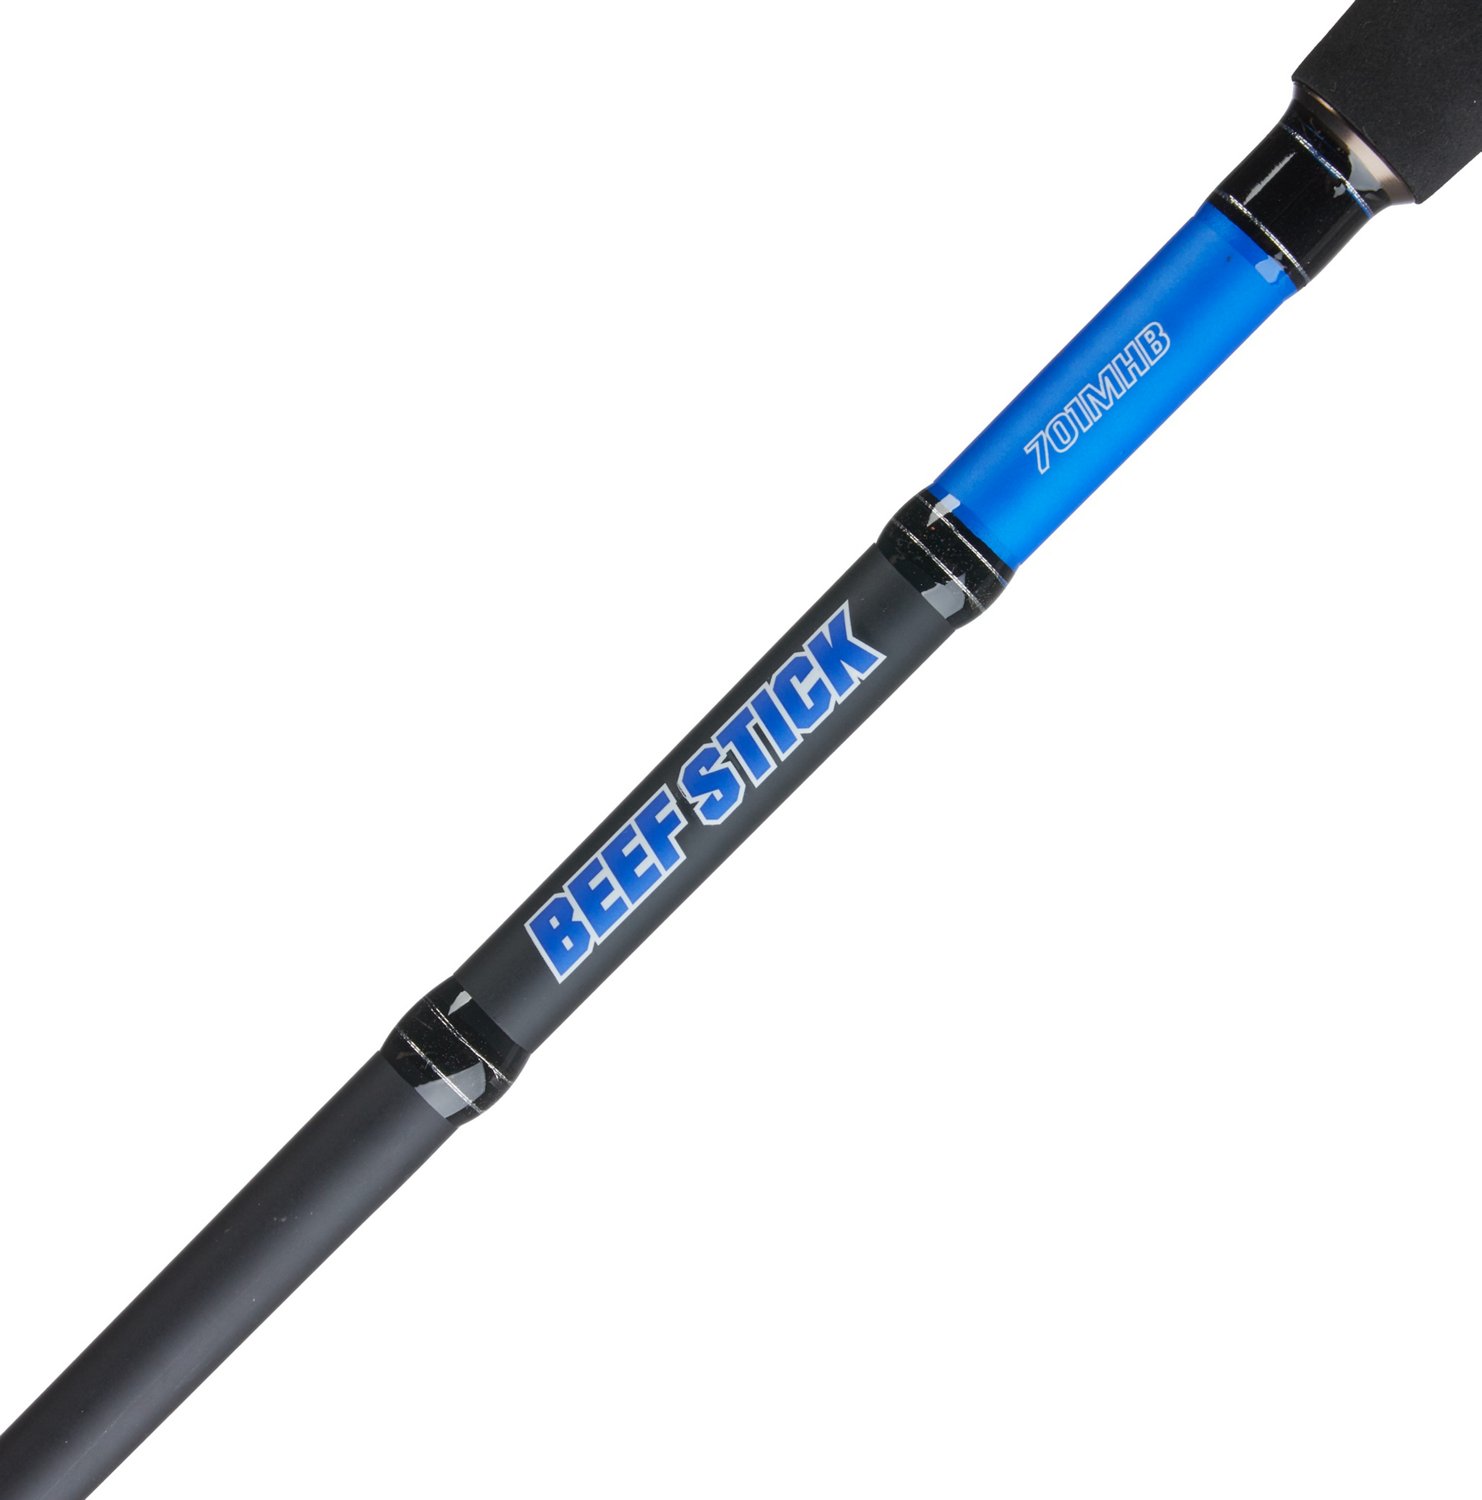 Fishing Rod Daiwa Beefstick Surf Spinning Rod at best price in